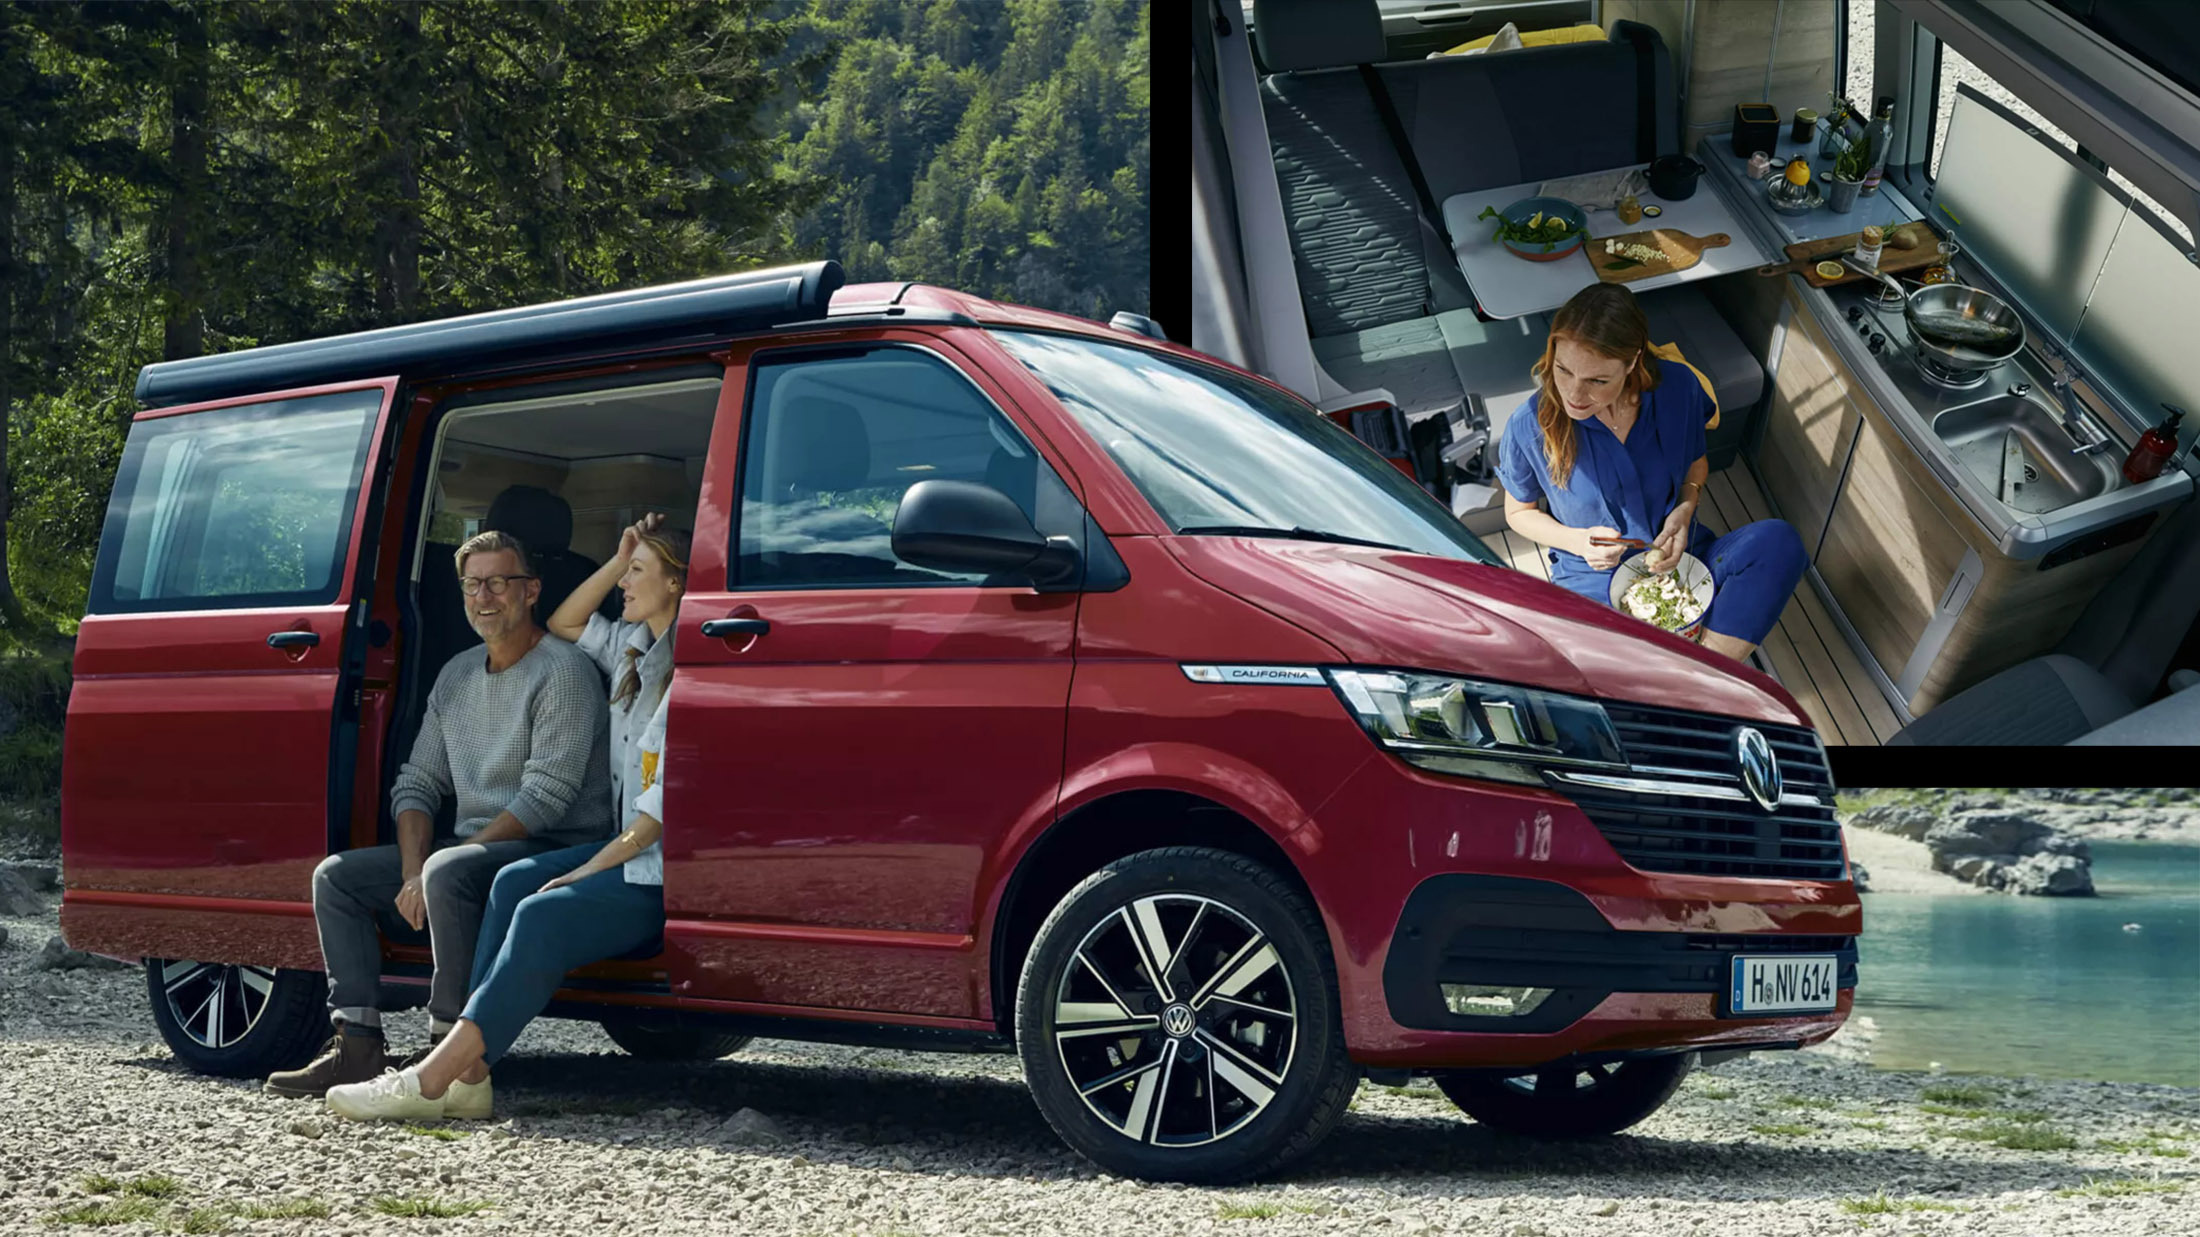 2020 VW Caddy Debuts As High-Tech, Small Van That's Ready To Work